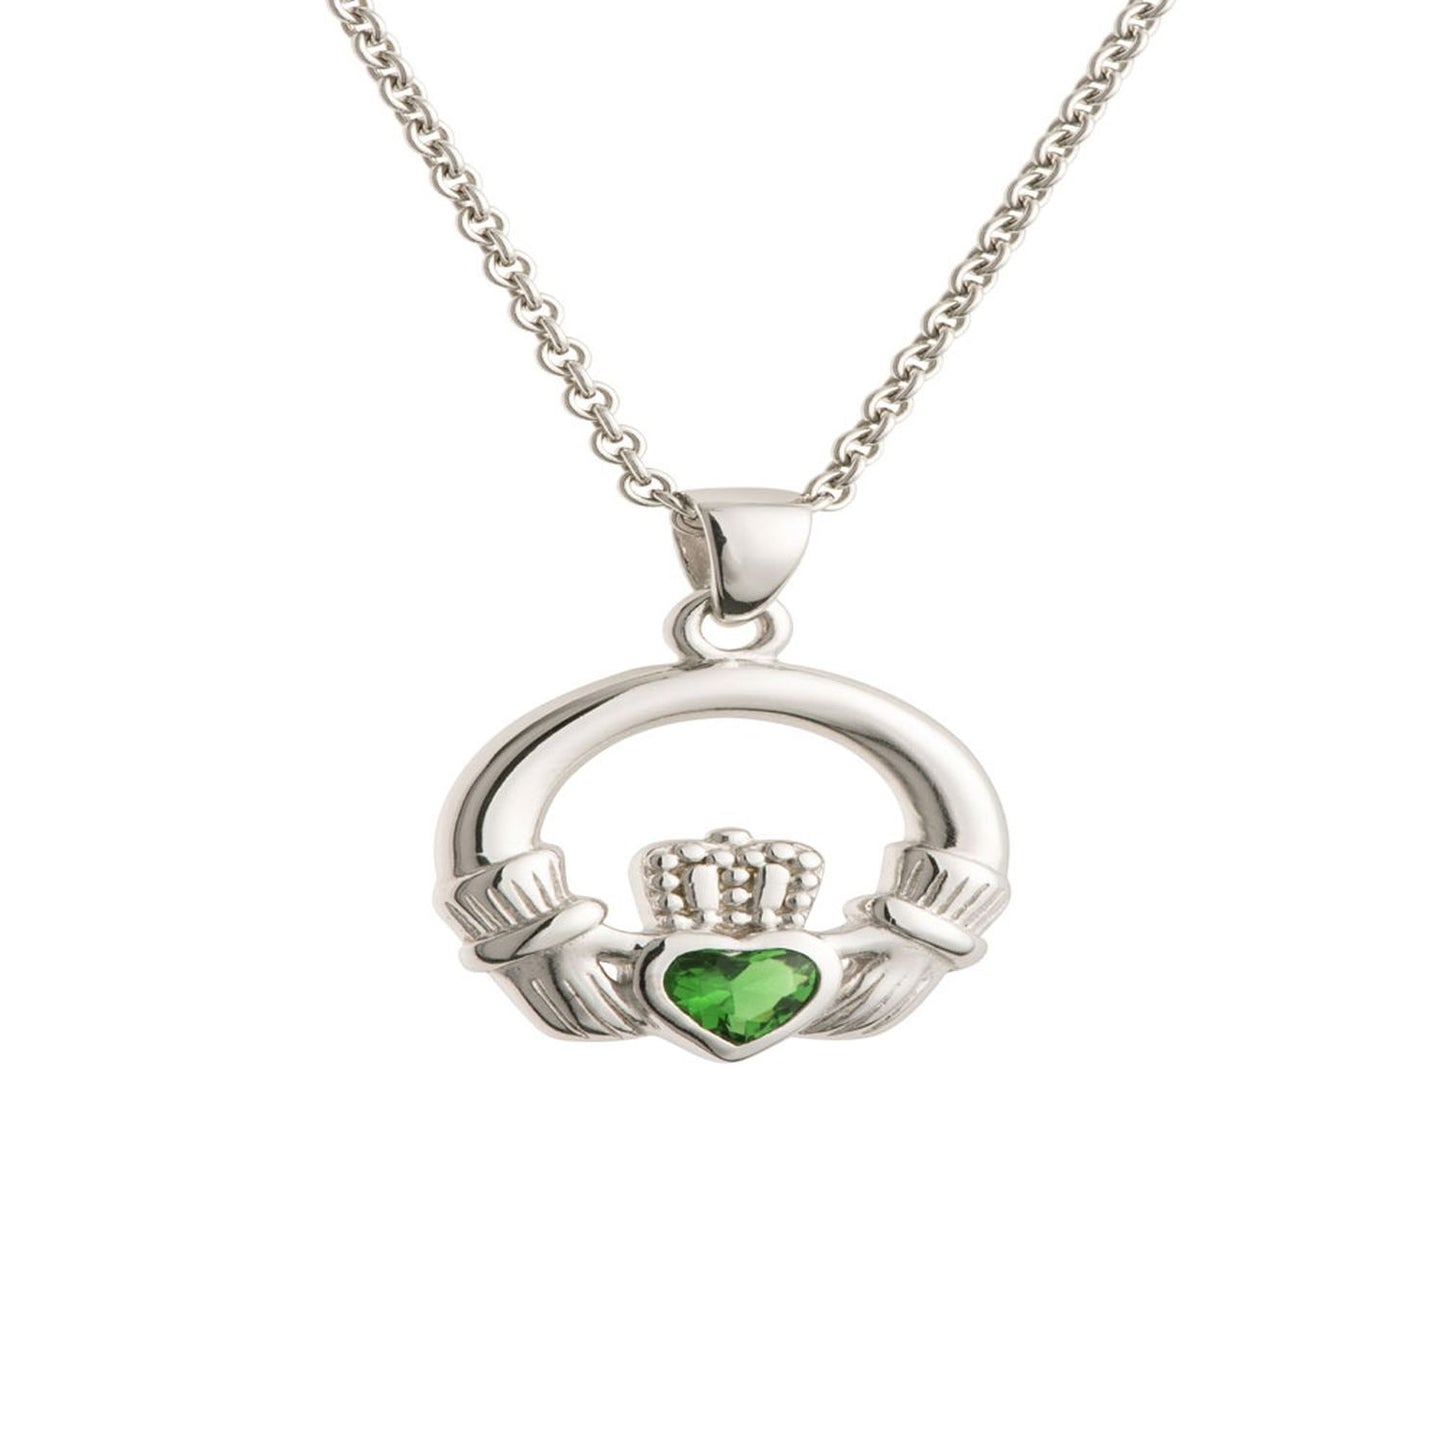 Galway Green Crystal Claddagh Pendant, 2.68 Gms - Rhodium Plated Sterling Silver